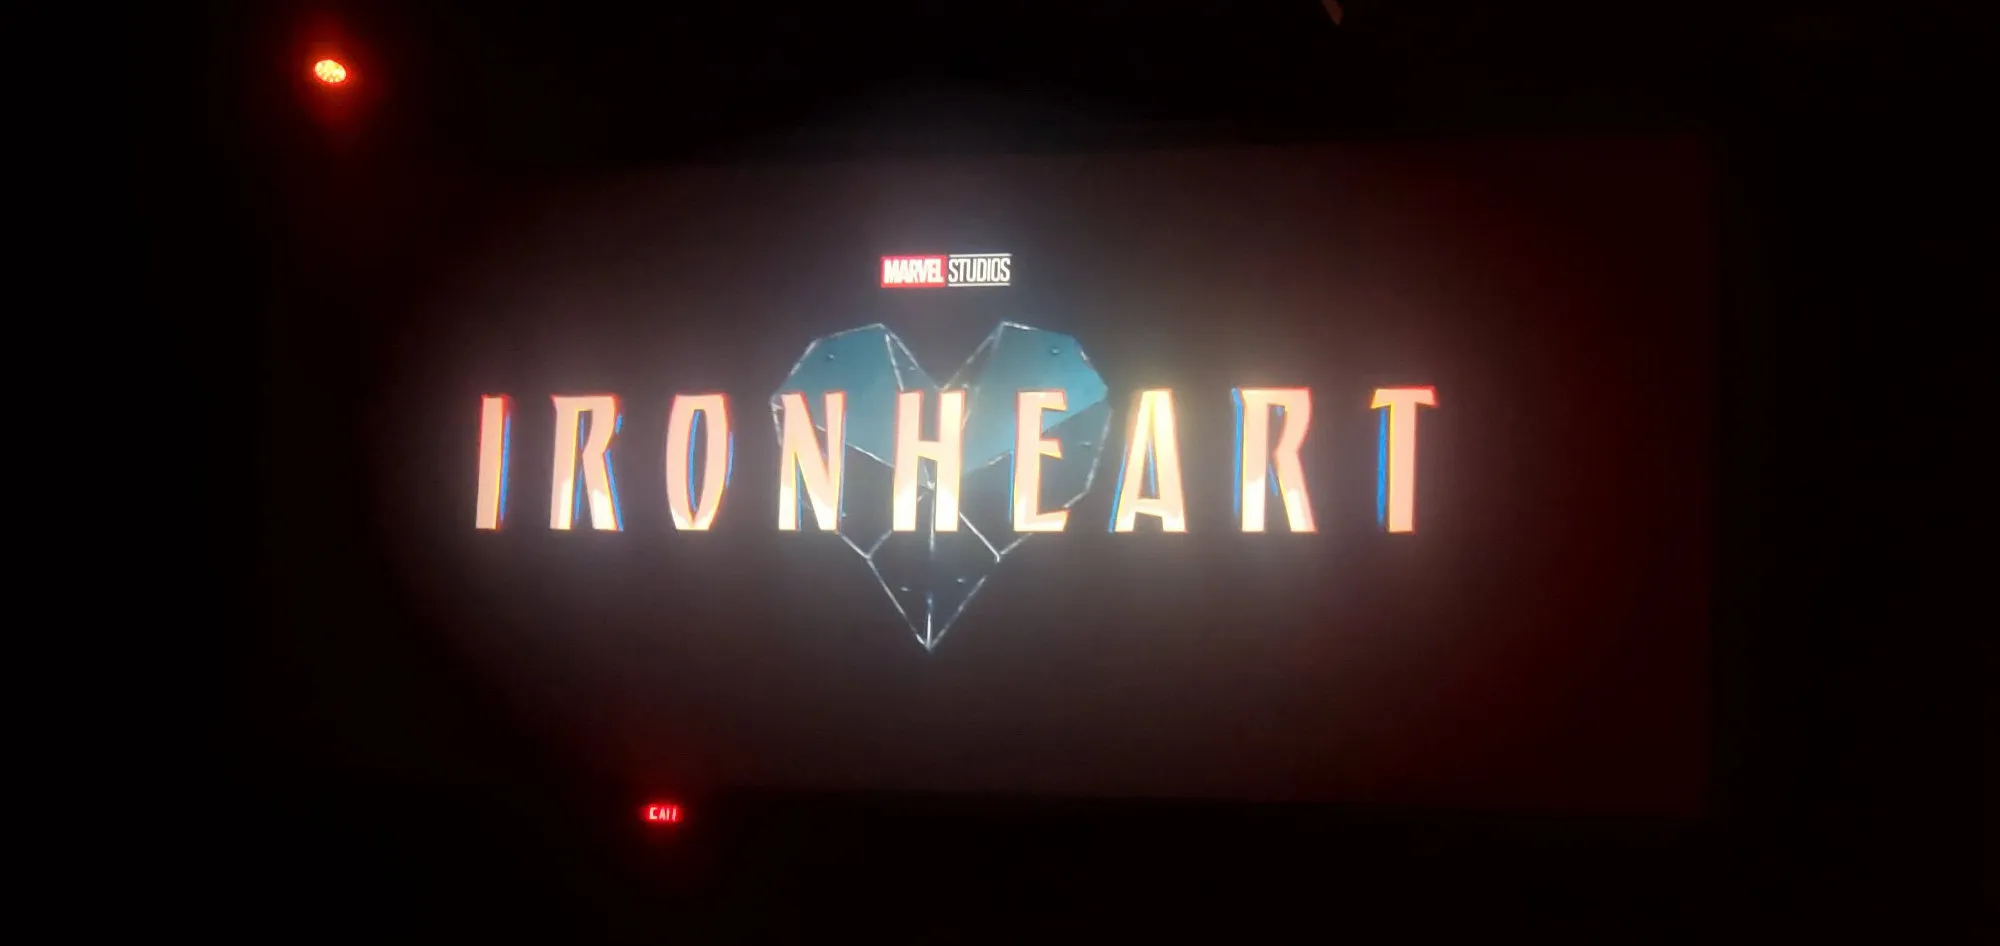 Marvel's 'Ironheart' Reveals Logo, Anthony Ramos Confirmed to Play 'The Hood' | FMV6